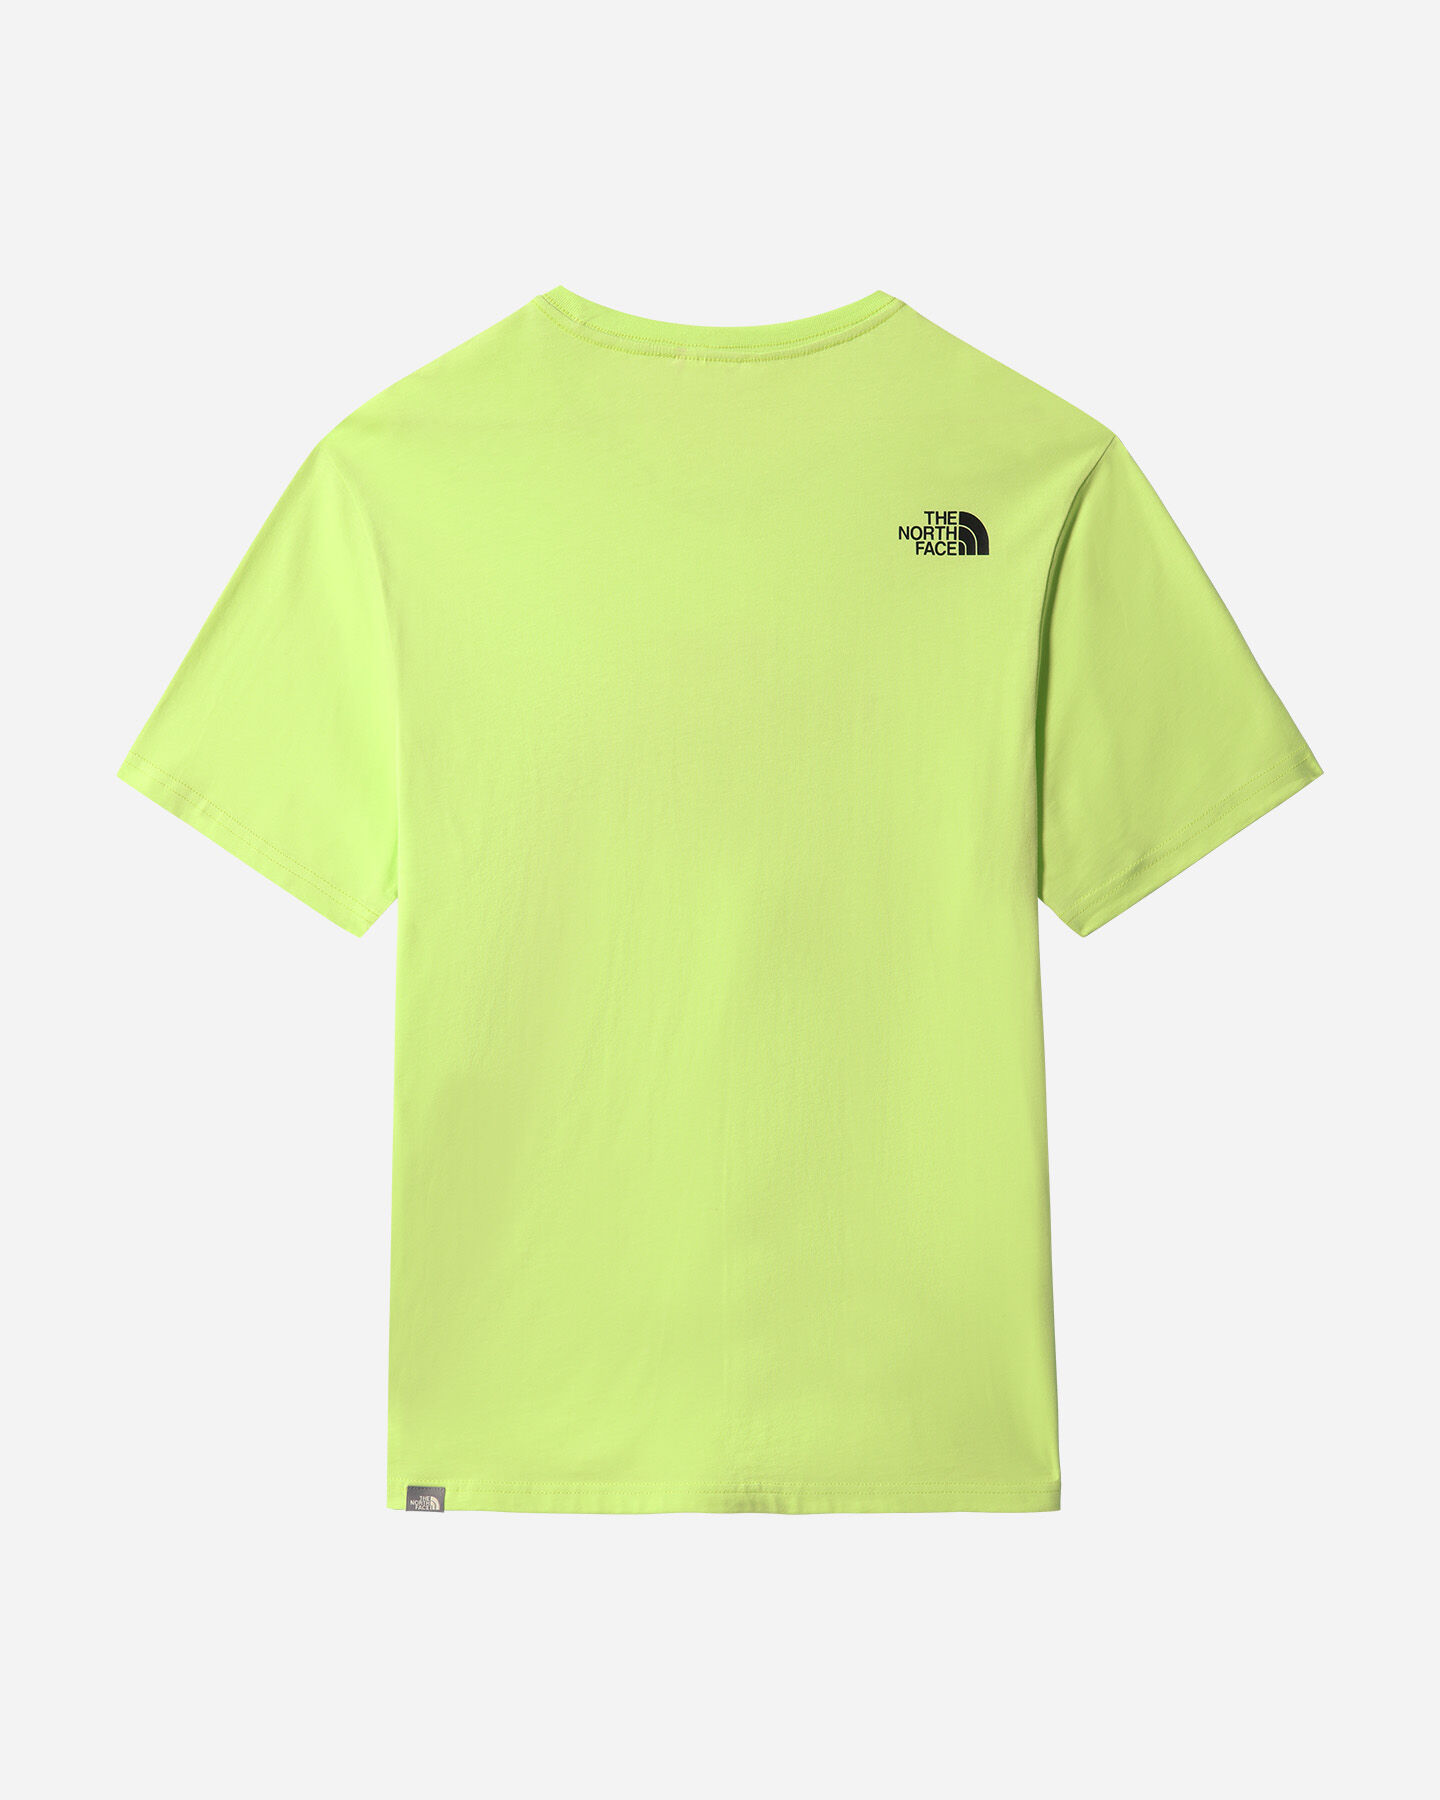  T-Shirt THE NORTH FACE EASY BIG LOGO M S5421996|HDD|S scatto 1